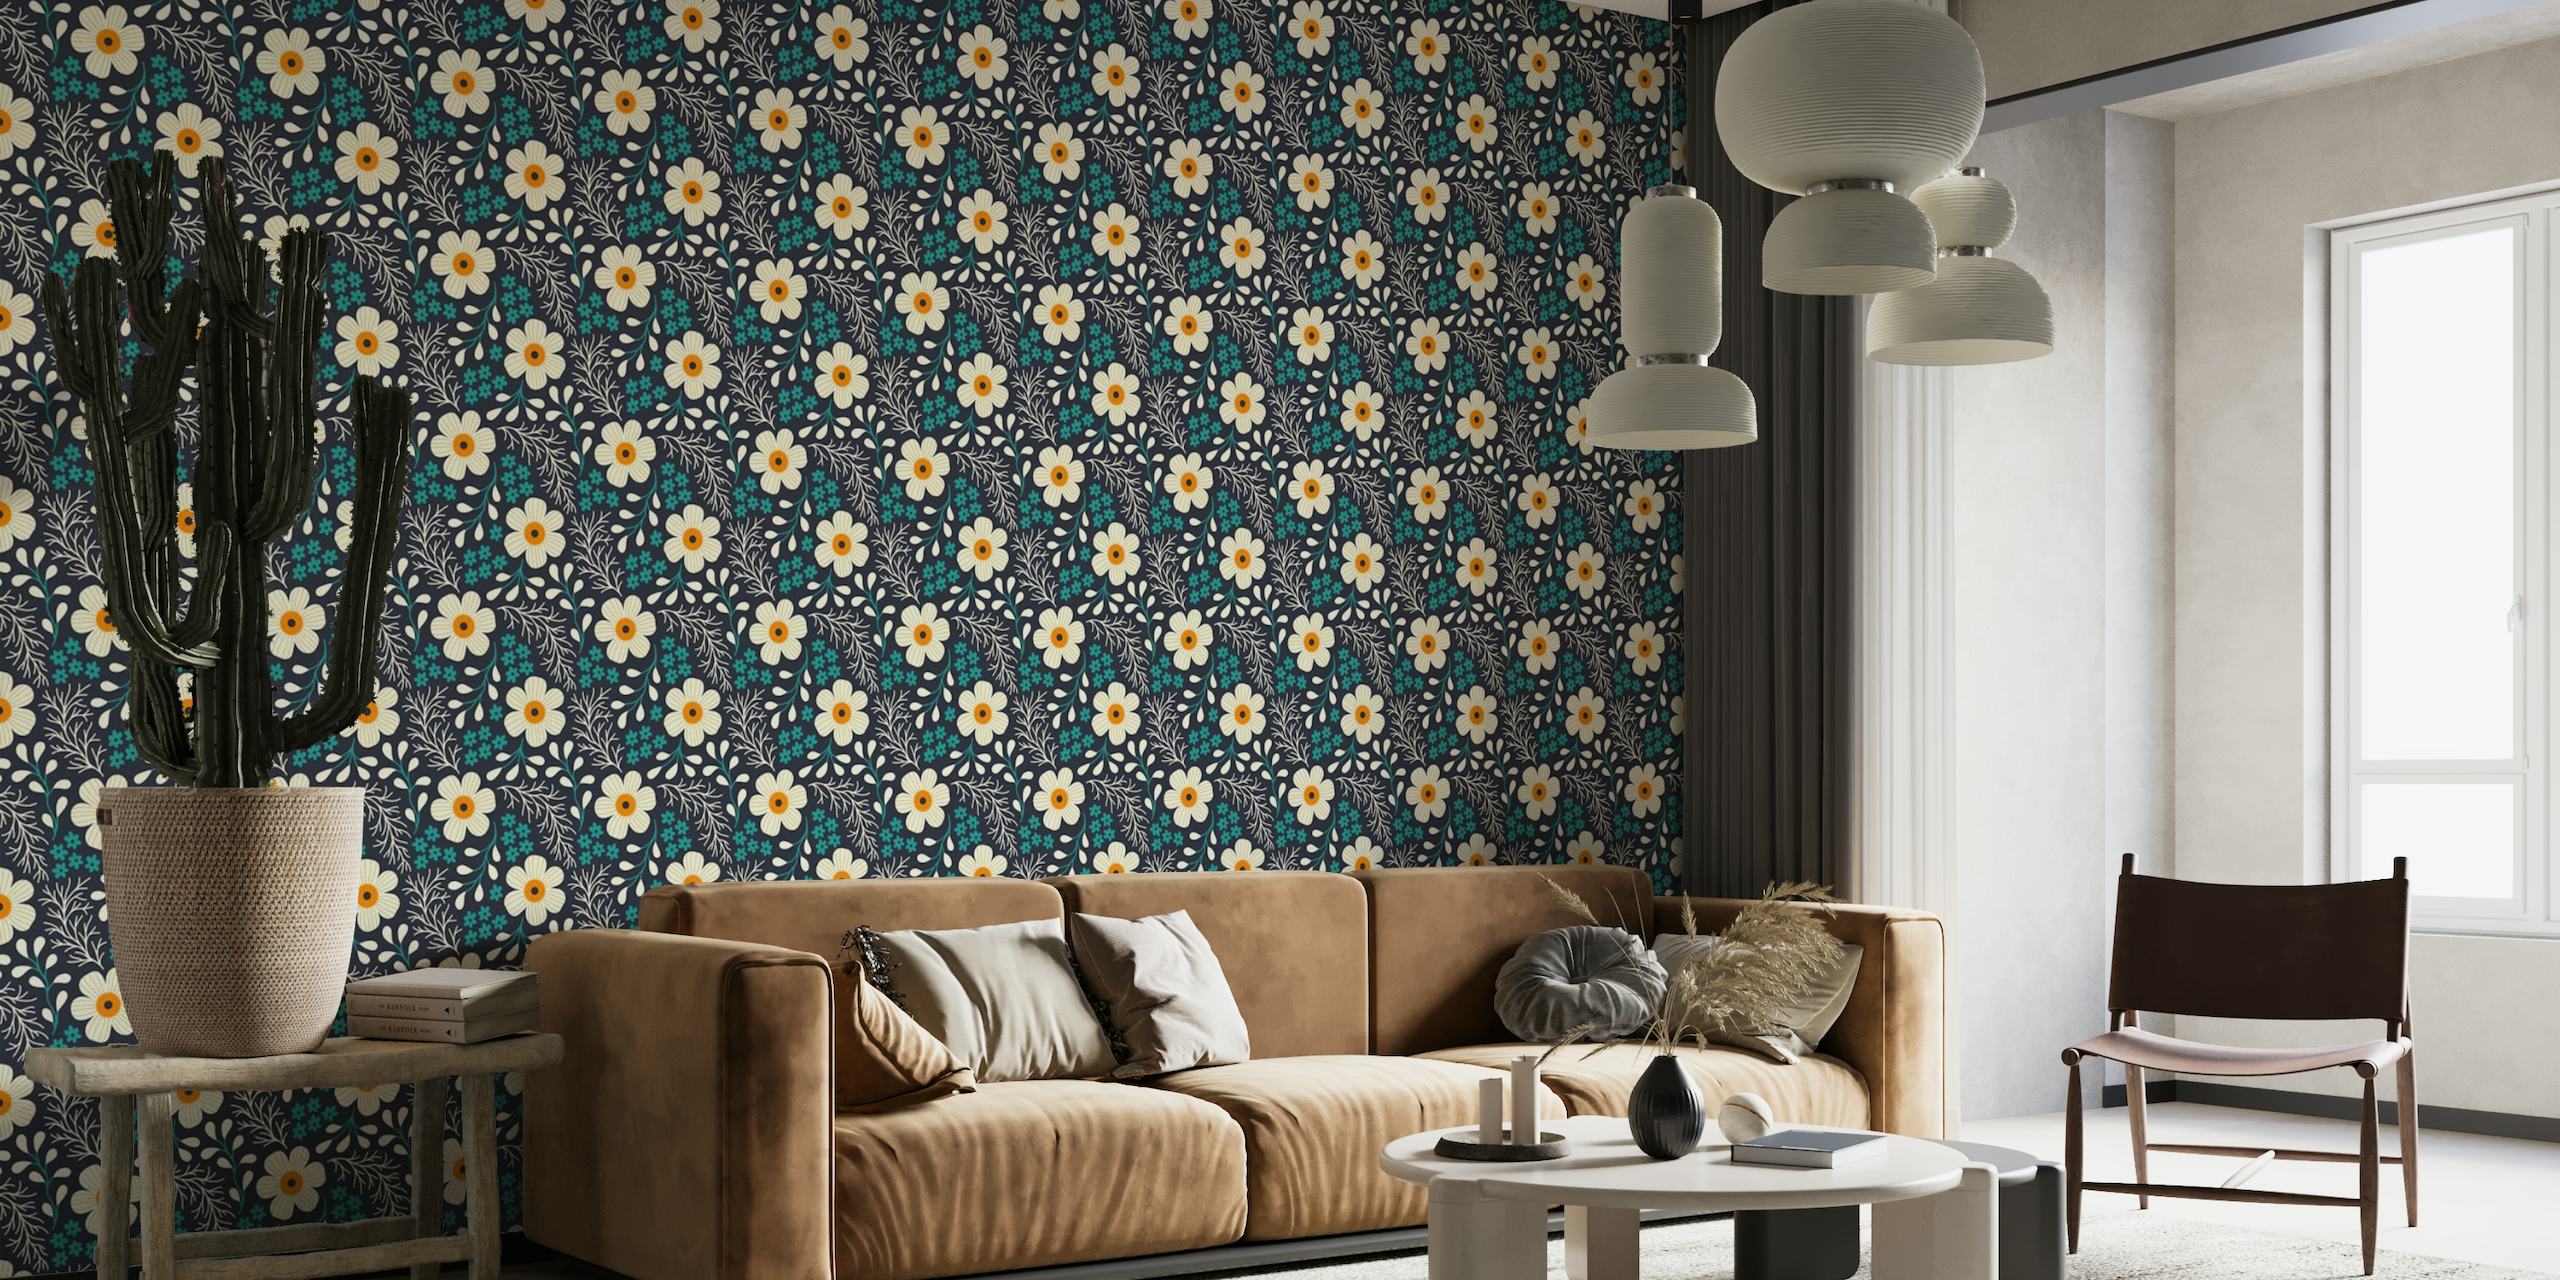 Ditsy floral pattern wall mural with teal, white, and mustard colors